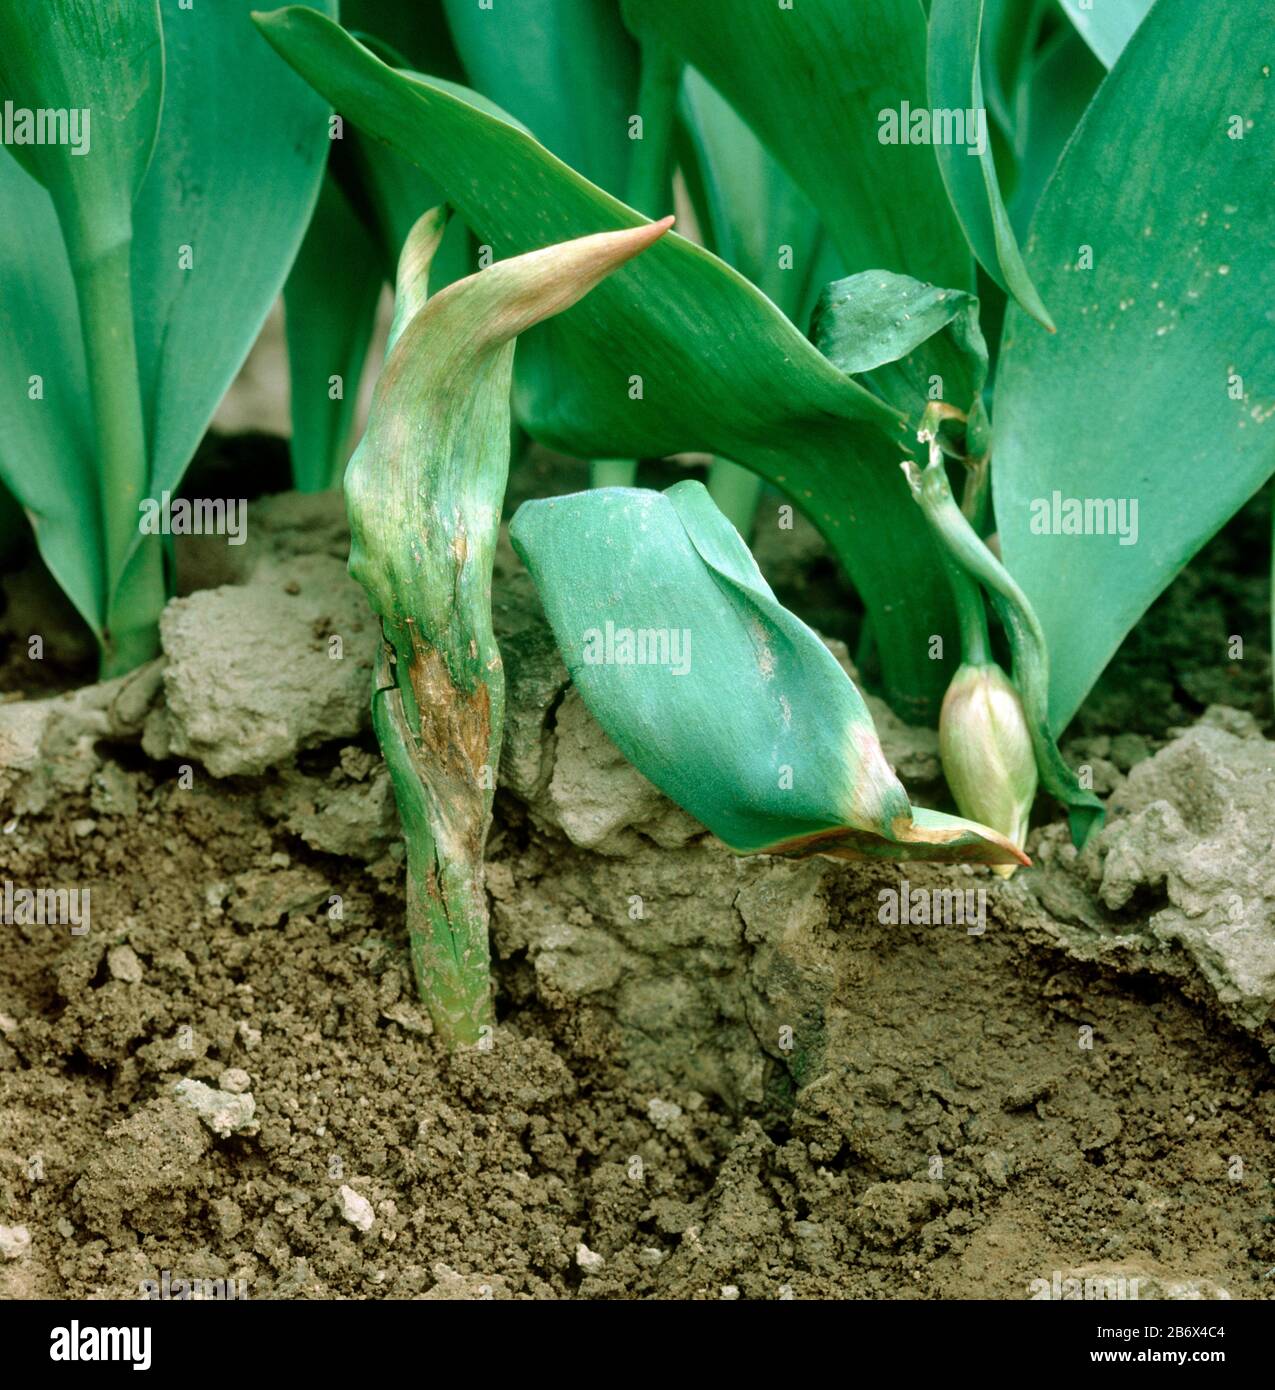 Tulip fire (Botrytis tulipae) disease damage and wilting of tulip (Tulipa sp.) plants in a crop in bud, Lincolnshire, April, Stock Photo